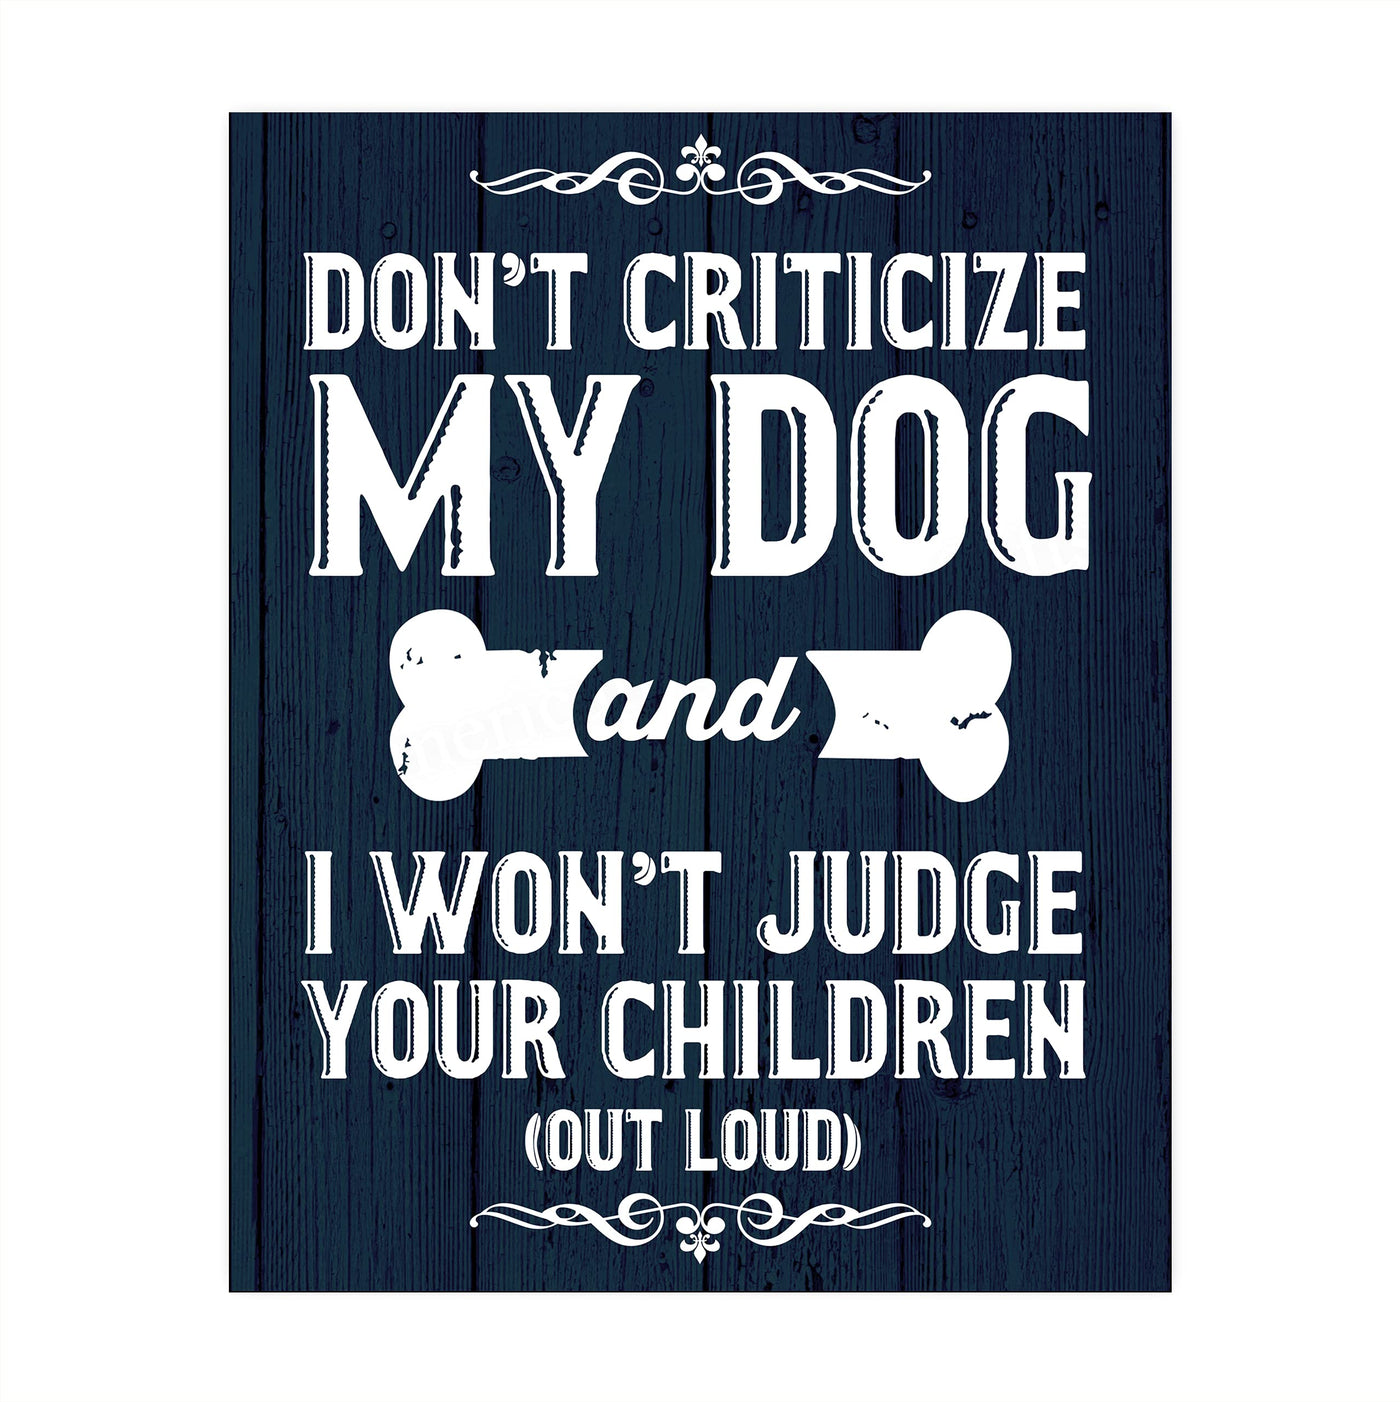 Don't Criticize My Dog-Won't Judge Your Children Funny Dog Sign -8 x 10" Wall Art Print-Ready to Frame. Humorous Decor for Home-Kitchen-Office. Fun Reminder for Guests! Printed on Photo Paper.